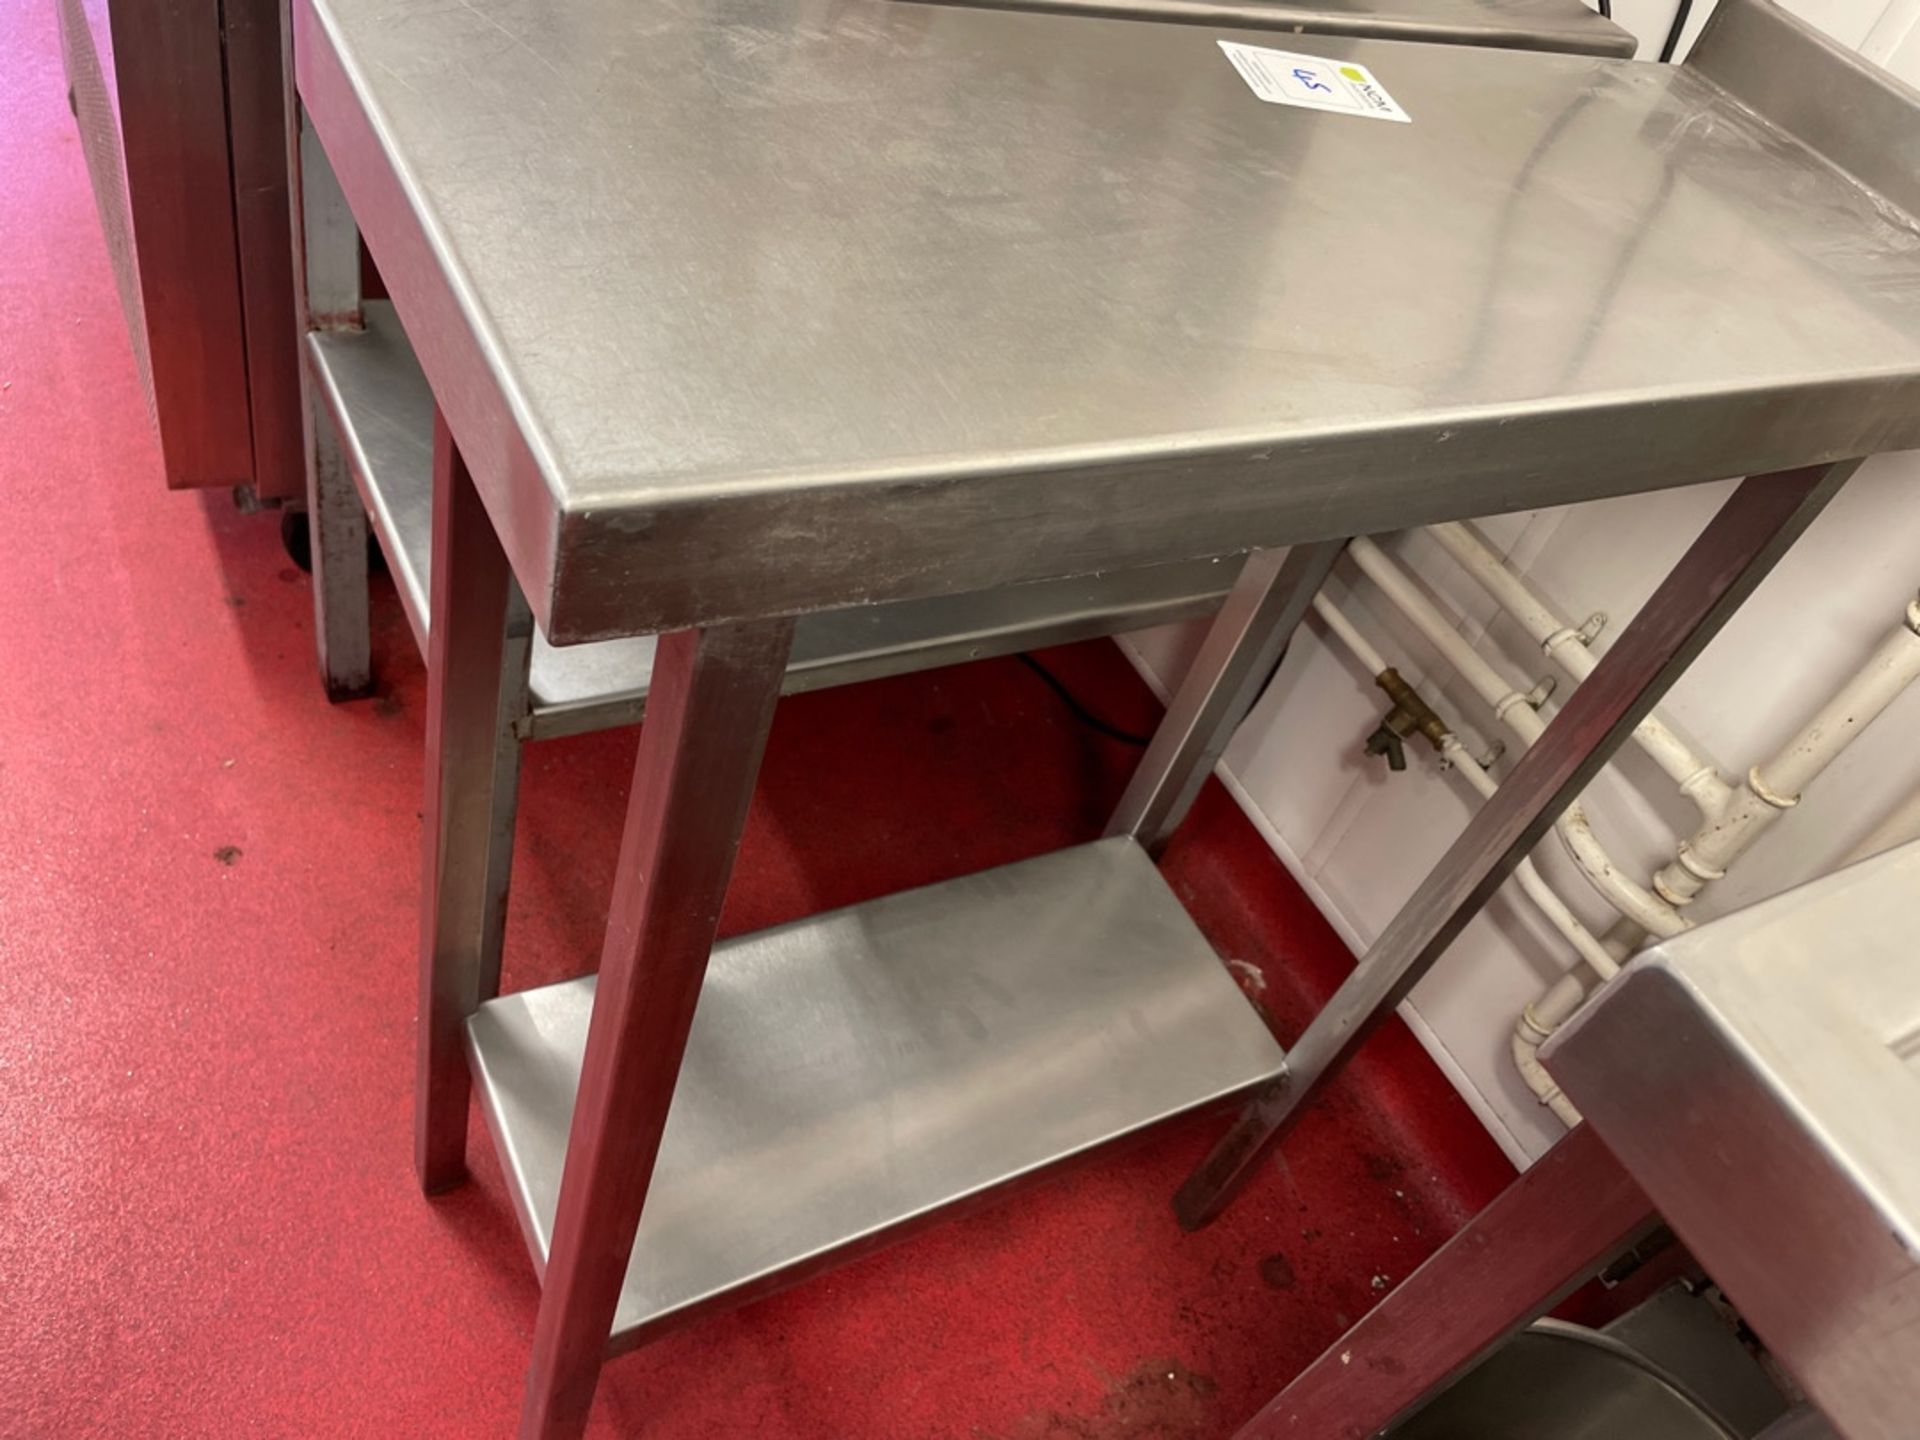 Stainless Steel Prep Station - Image 2 of 2